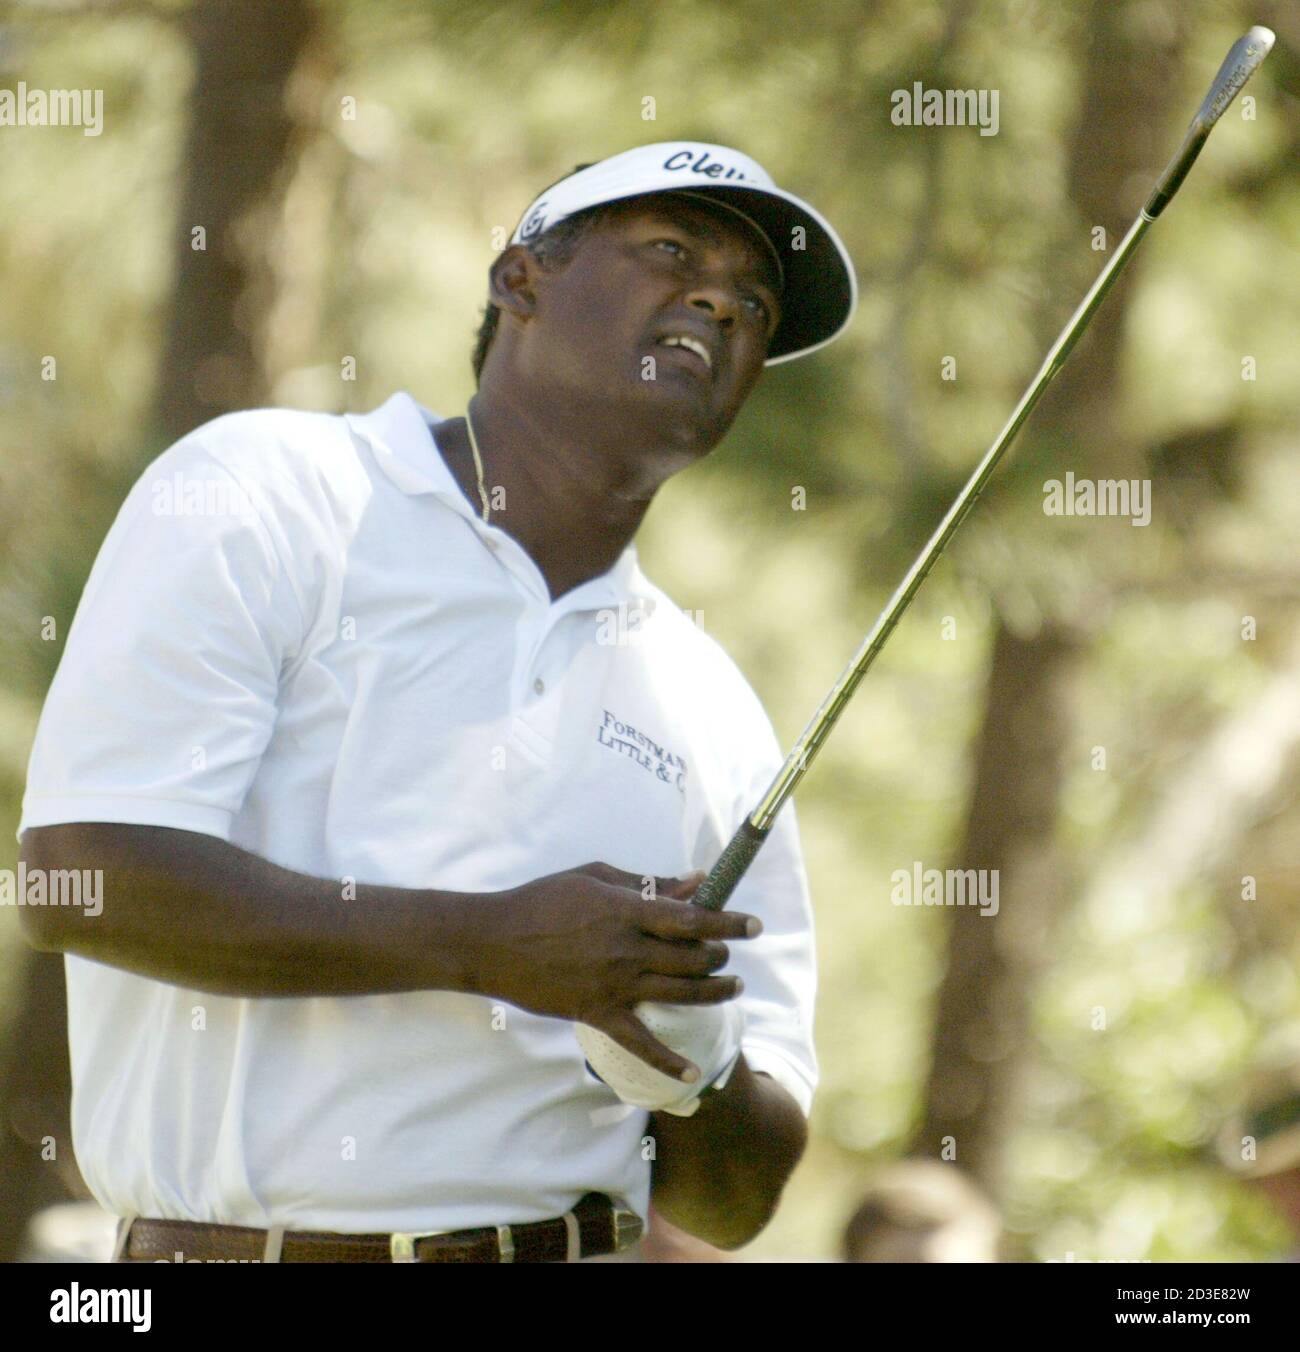 Vijay Singh watches his tee shot from the second hole, during the third round of The International in Castle Rock, Colorado, August 9, 2003. Singh is among the leaders during the third round of the tournament, which uses the modified Stableford scoring system. REUTERS/Gary C. Caskey  GCC/GN Stock Photo